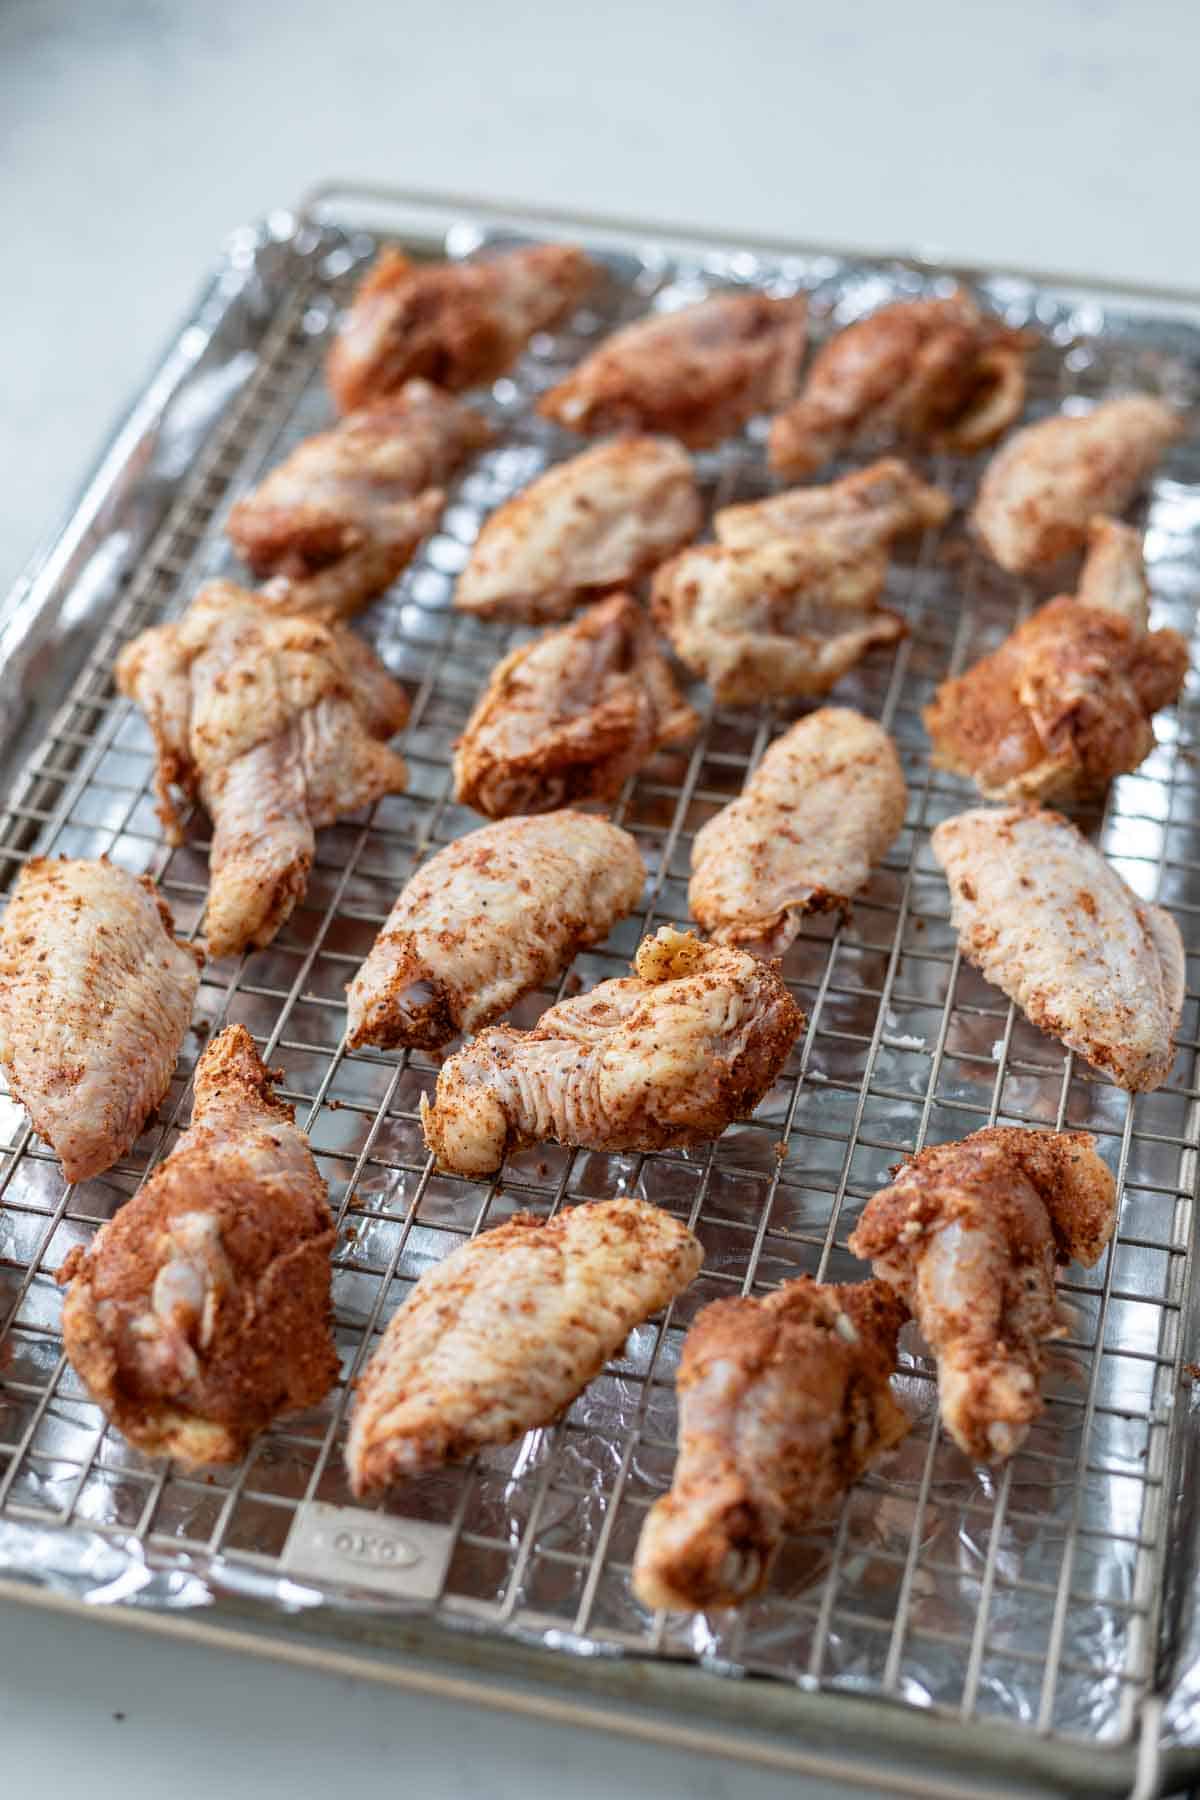 Dry Rub wings on a baking rack uncooked.